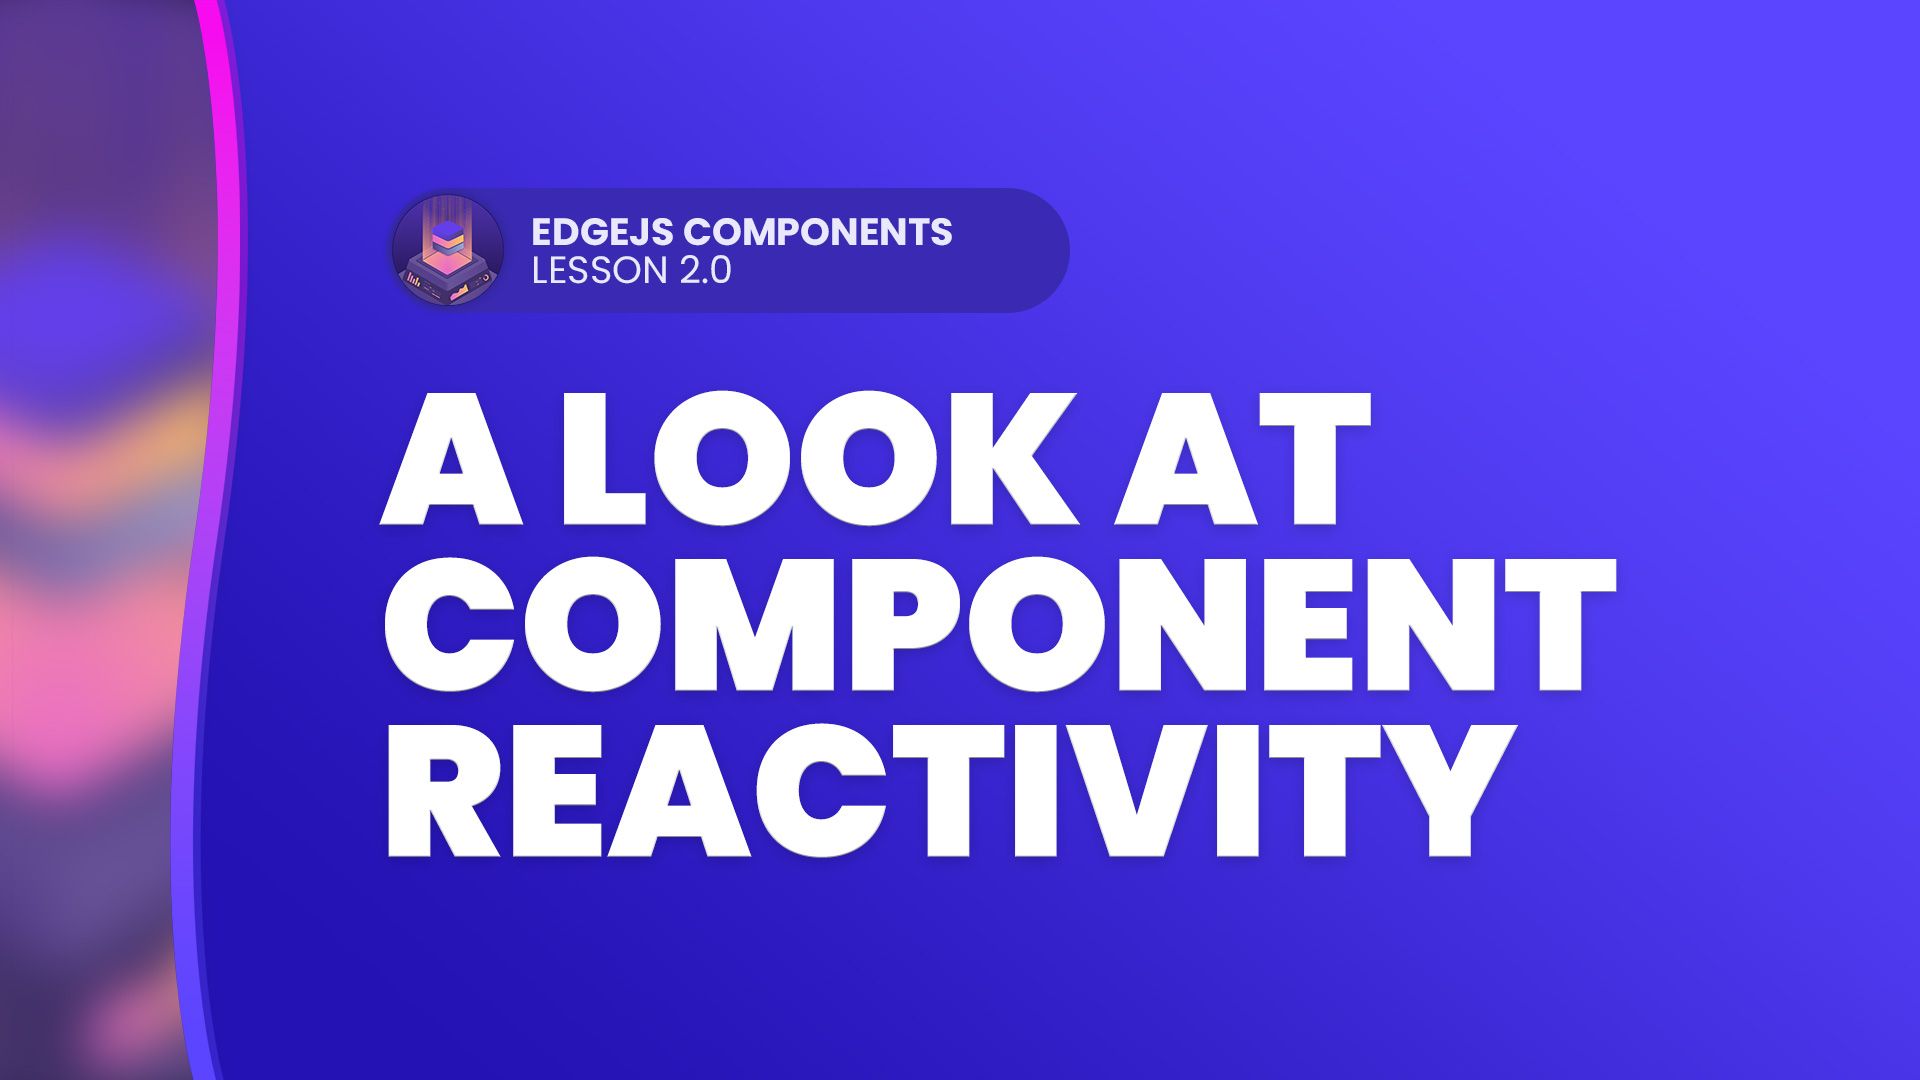 A Look at Component Reactivity